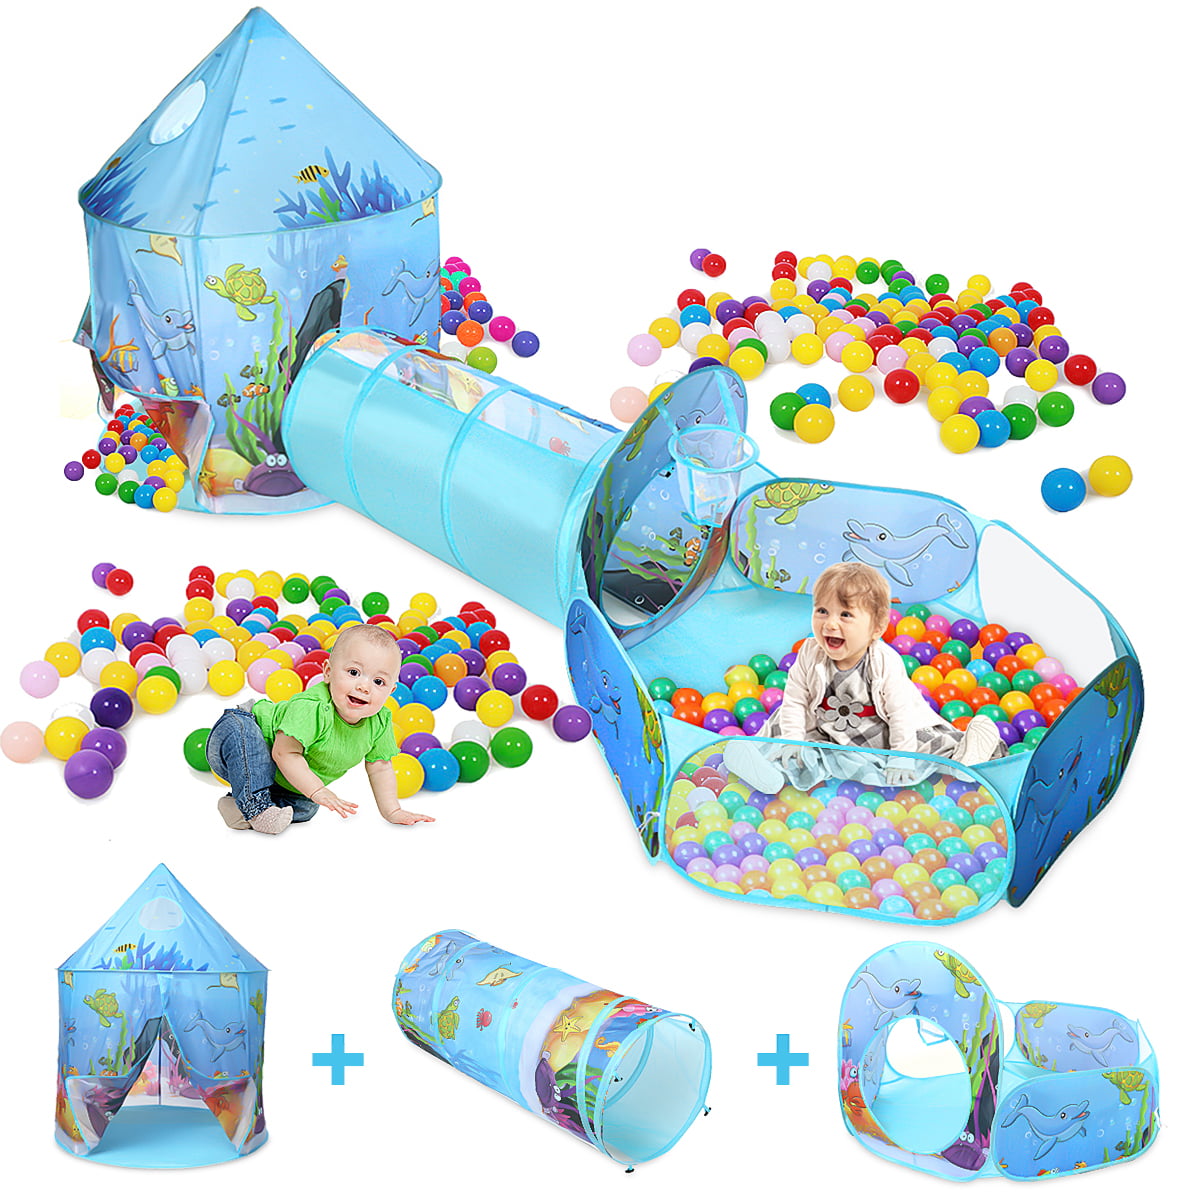 Kids Play Tent Crawl Tunnel 3 In 1 Pop Up Playhouse Ball Pit Folding Play Tent 